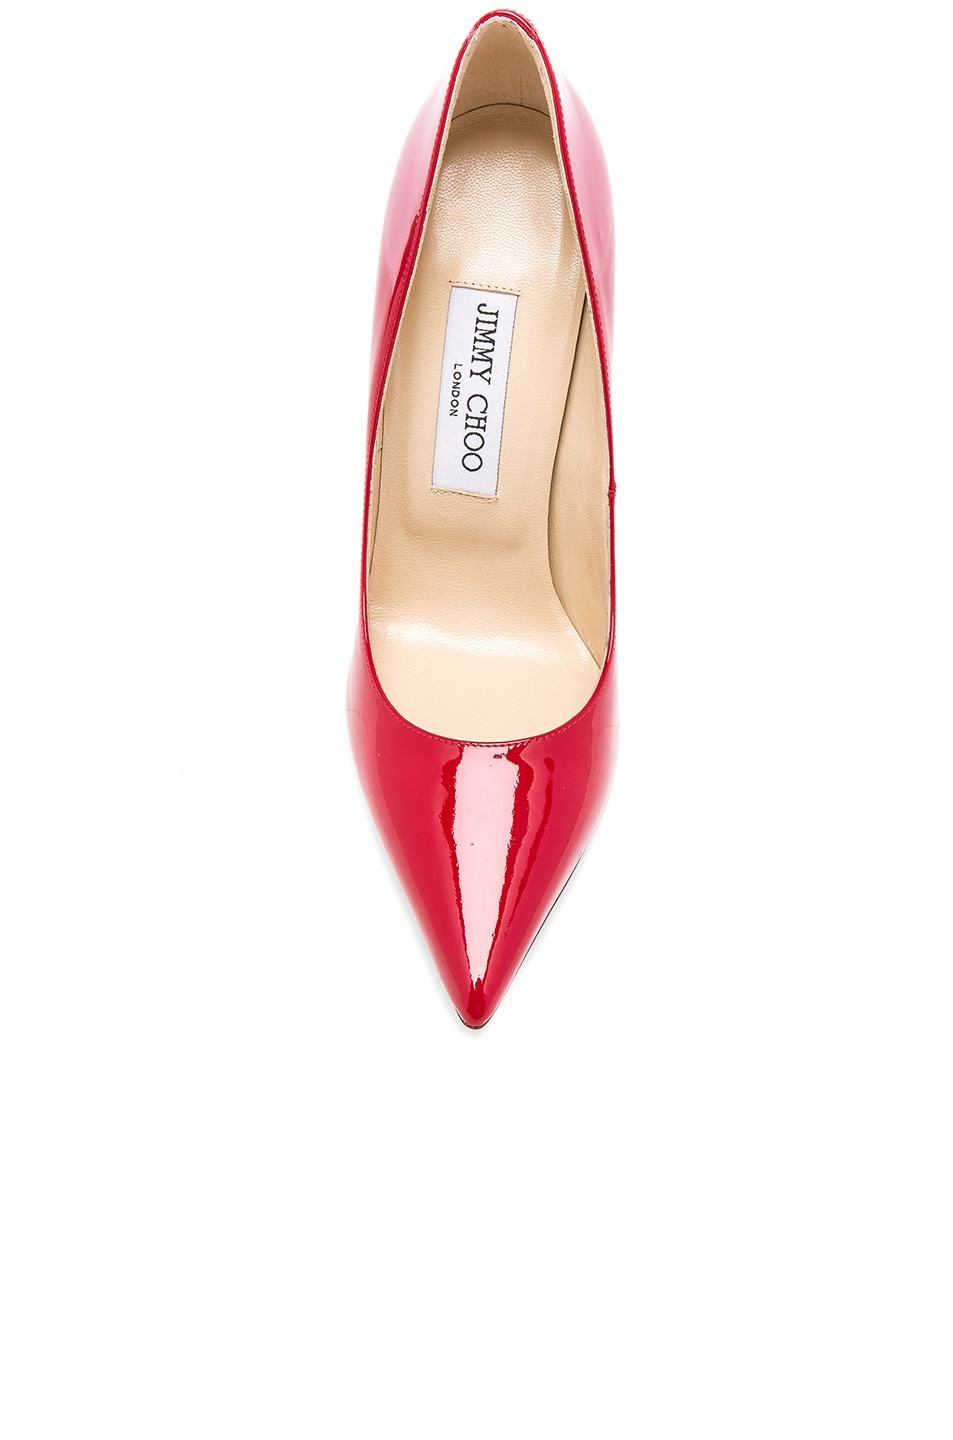 JIMMY CHOO ANOUK BLACK PATENT LEATHER POINTY TOE PUMPS, RED | ModeSens